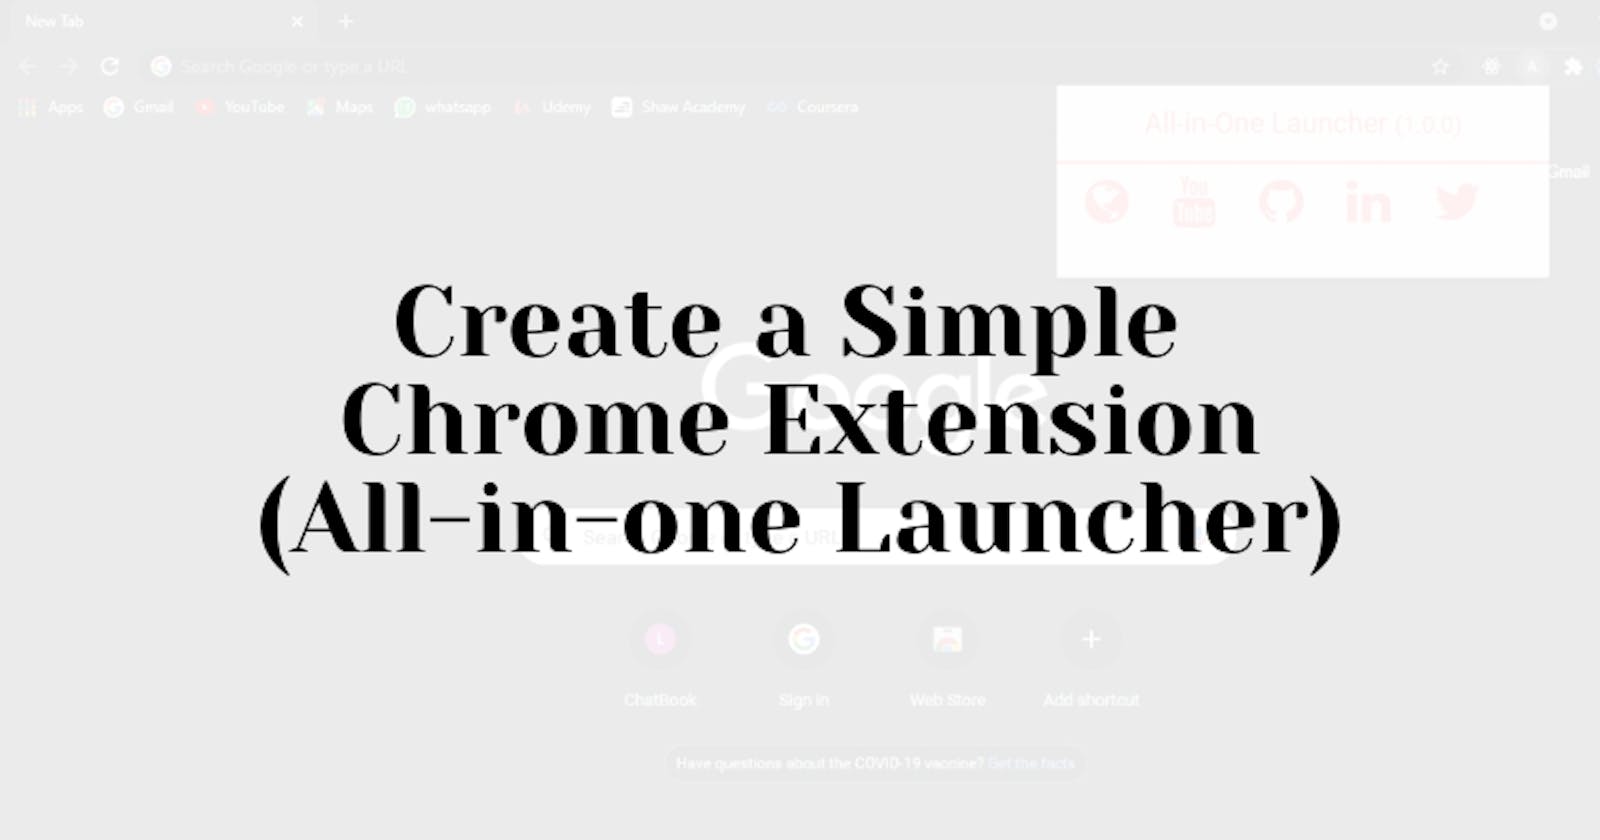 Create a Simple Chrome Extension using HTML and CSS